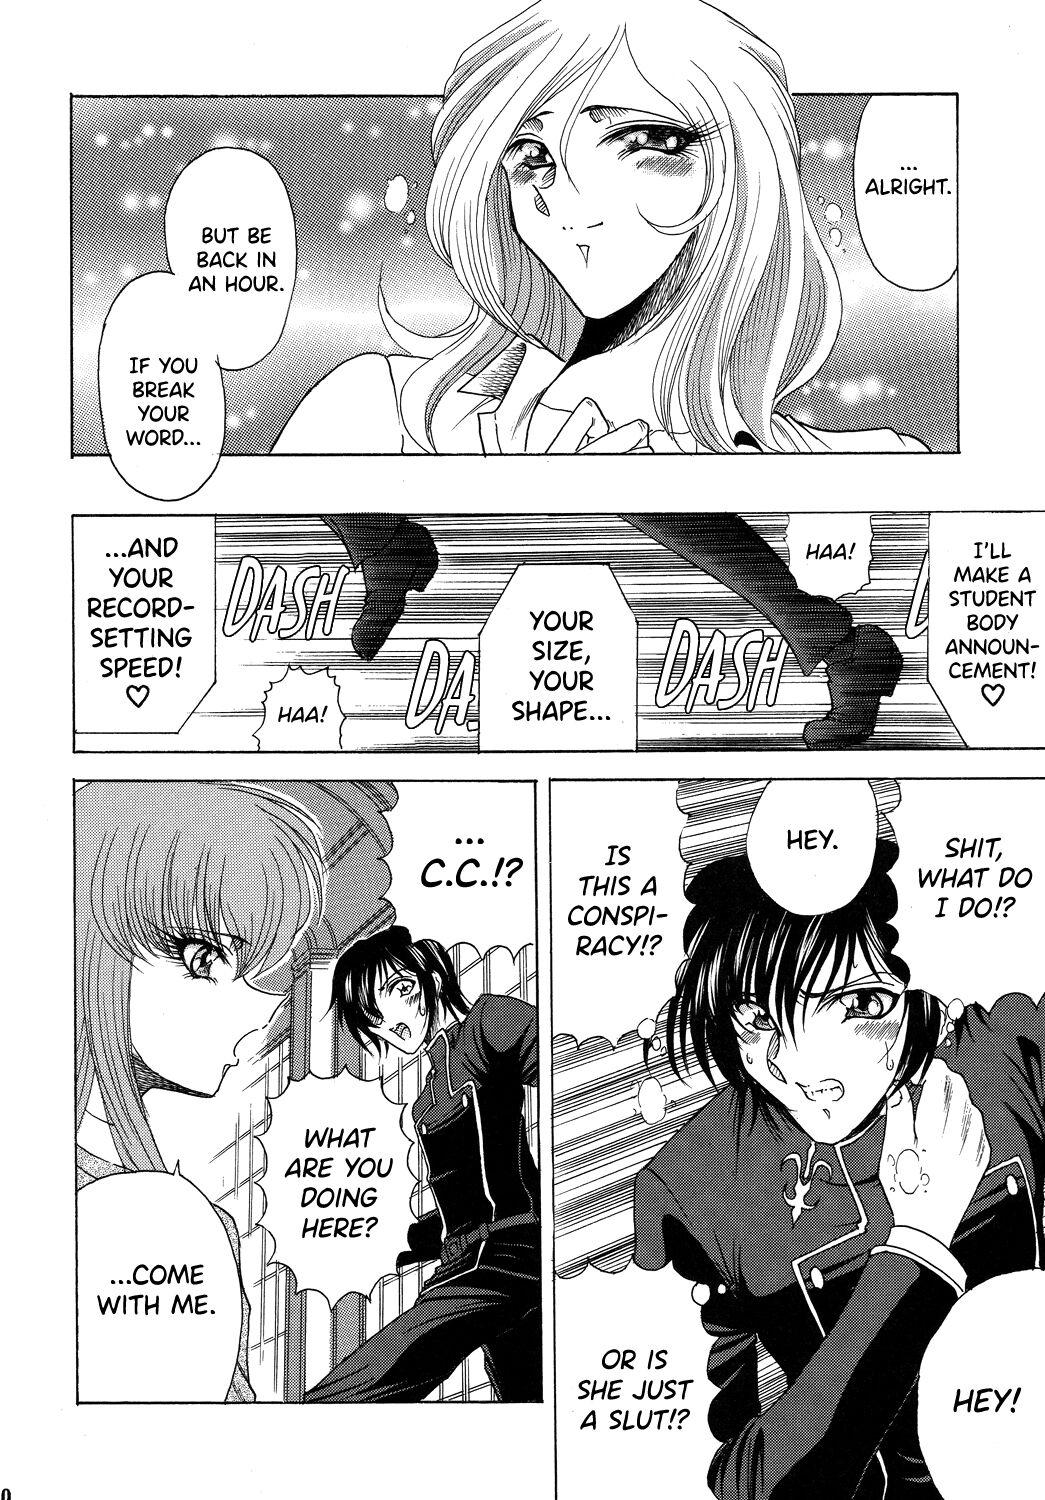 Anal Fuck ZONE 43 Lelouch of the God Speed - Code geass Stream - Page 9